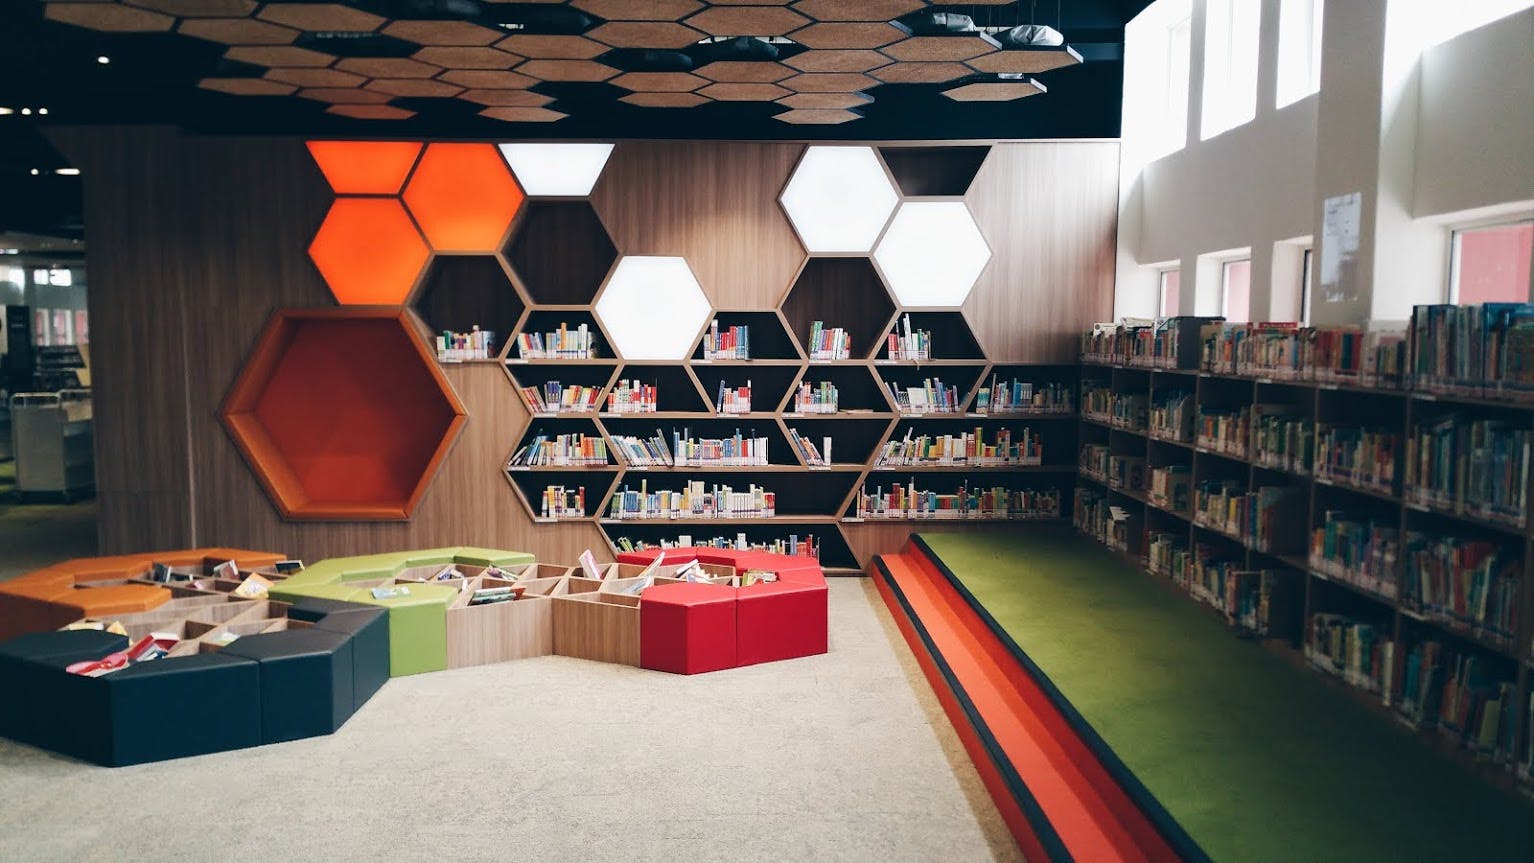 Children Section at Toa Payoh Public Library